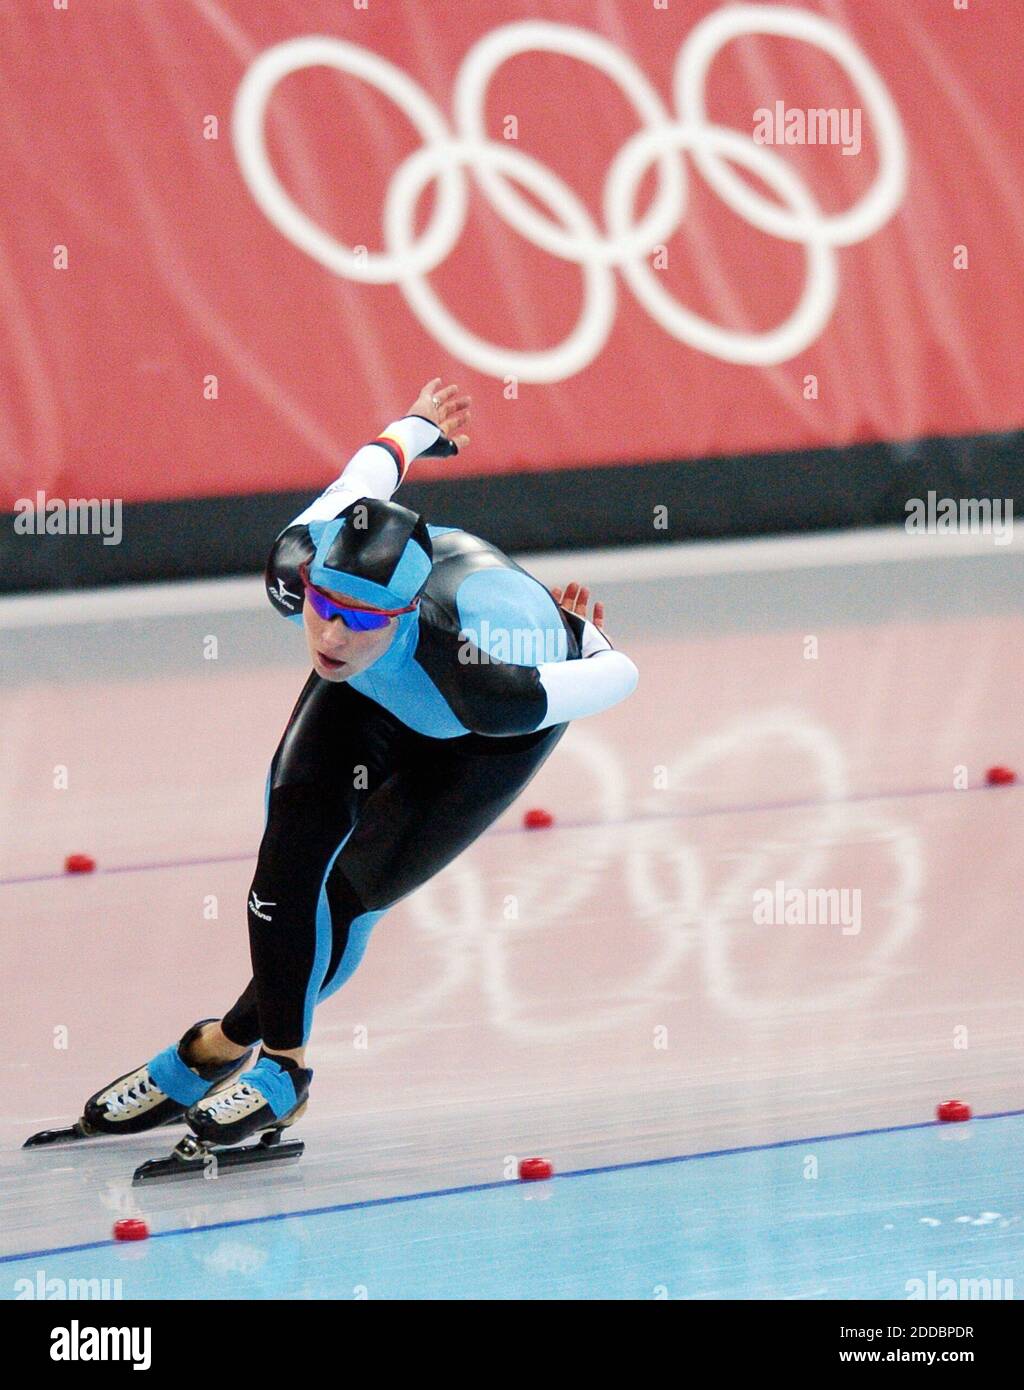 NO FILM, NO VIDEO, NO TV, NO DOCUMENTARY - Germany's Claudia Pechstein skates through a turn during her silver medal run in the Ladies' 5000-meter speedskating competition on February 25, 2006, at the Oval Lingotto in Turin, Italy during the 2006 Winter Olympics. Photo by Steve Deslich/KRT/Cameleon/ABACAPRESS.COM Stock Photo